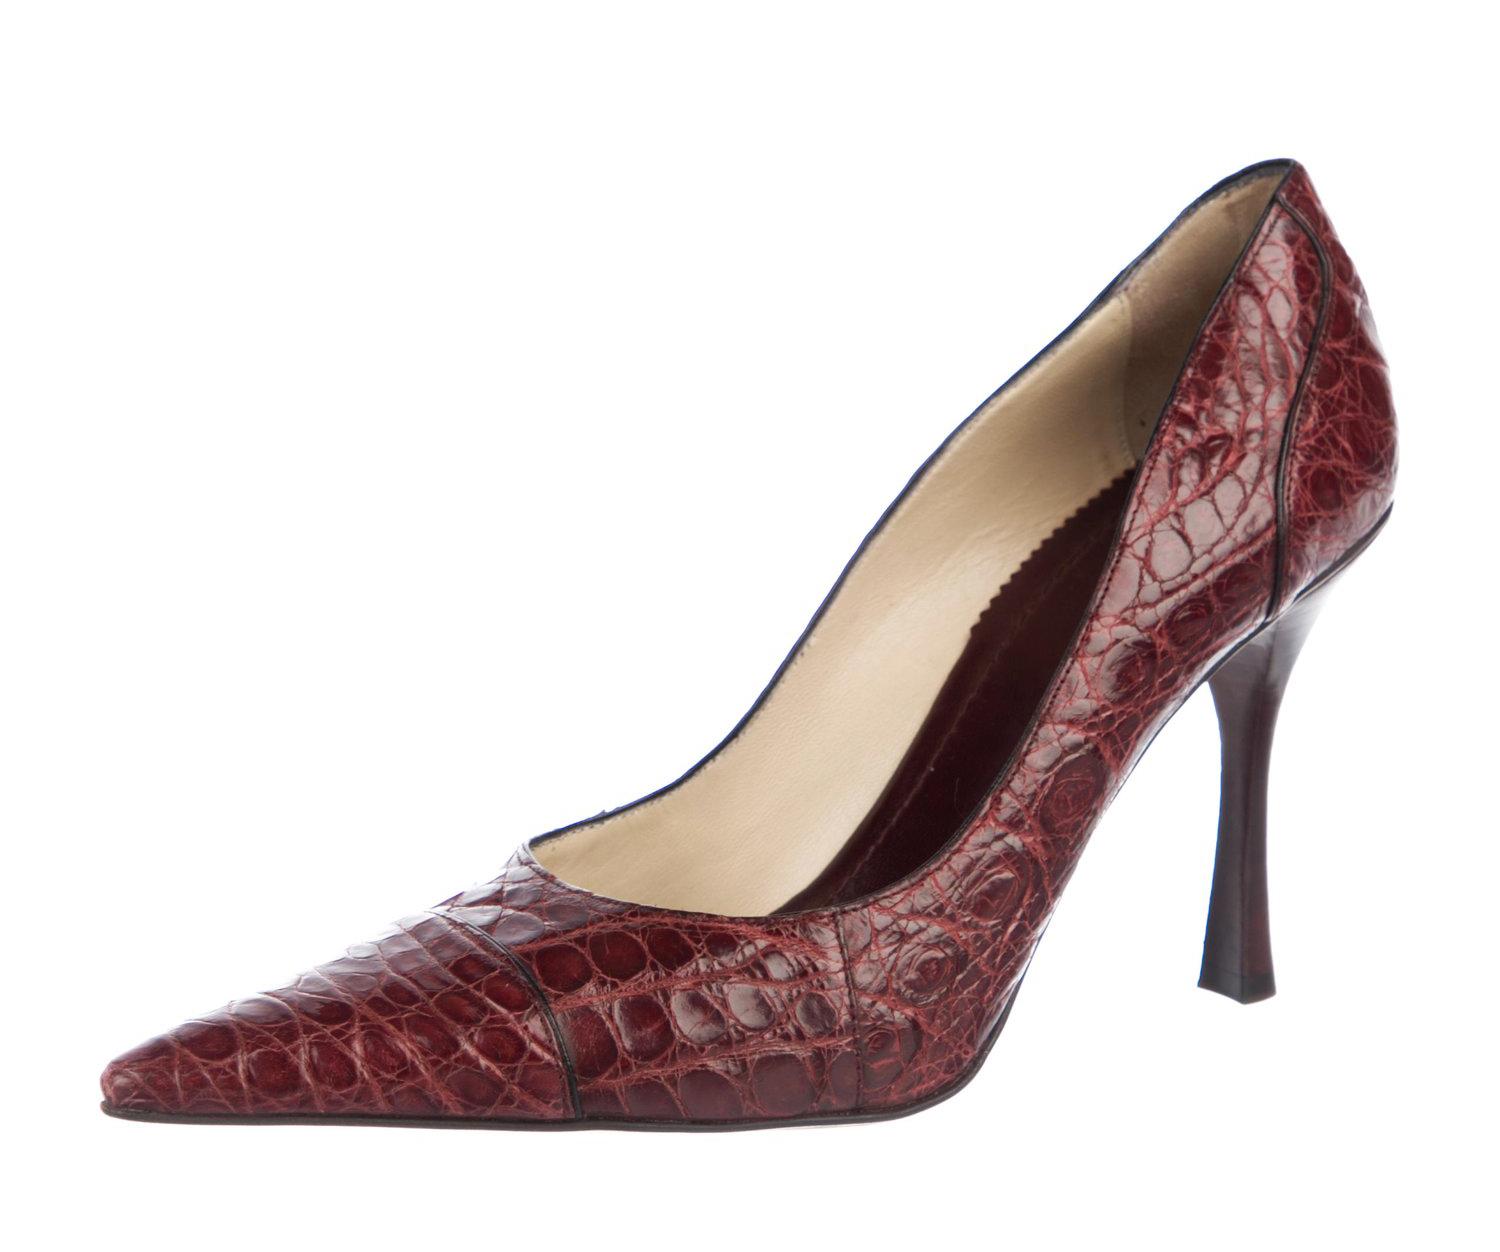 Tom Ford for Gucci F/W 2002 Collection Alligator Wine Color Shoes Pumps ...